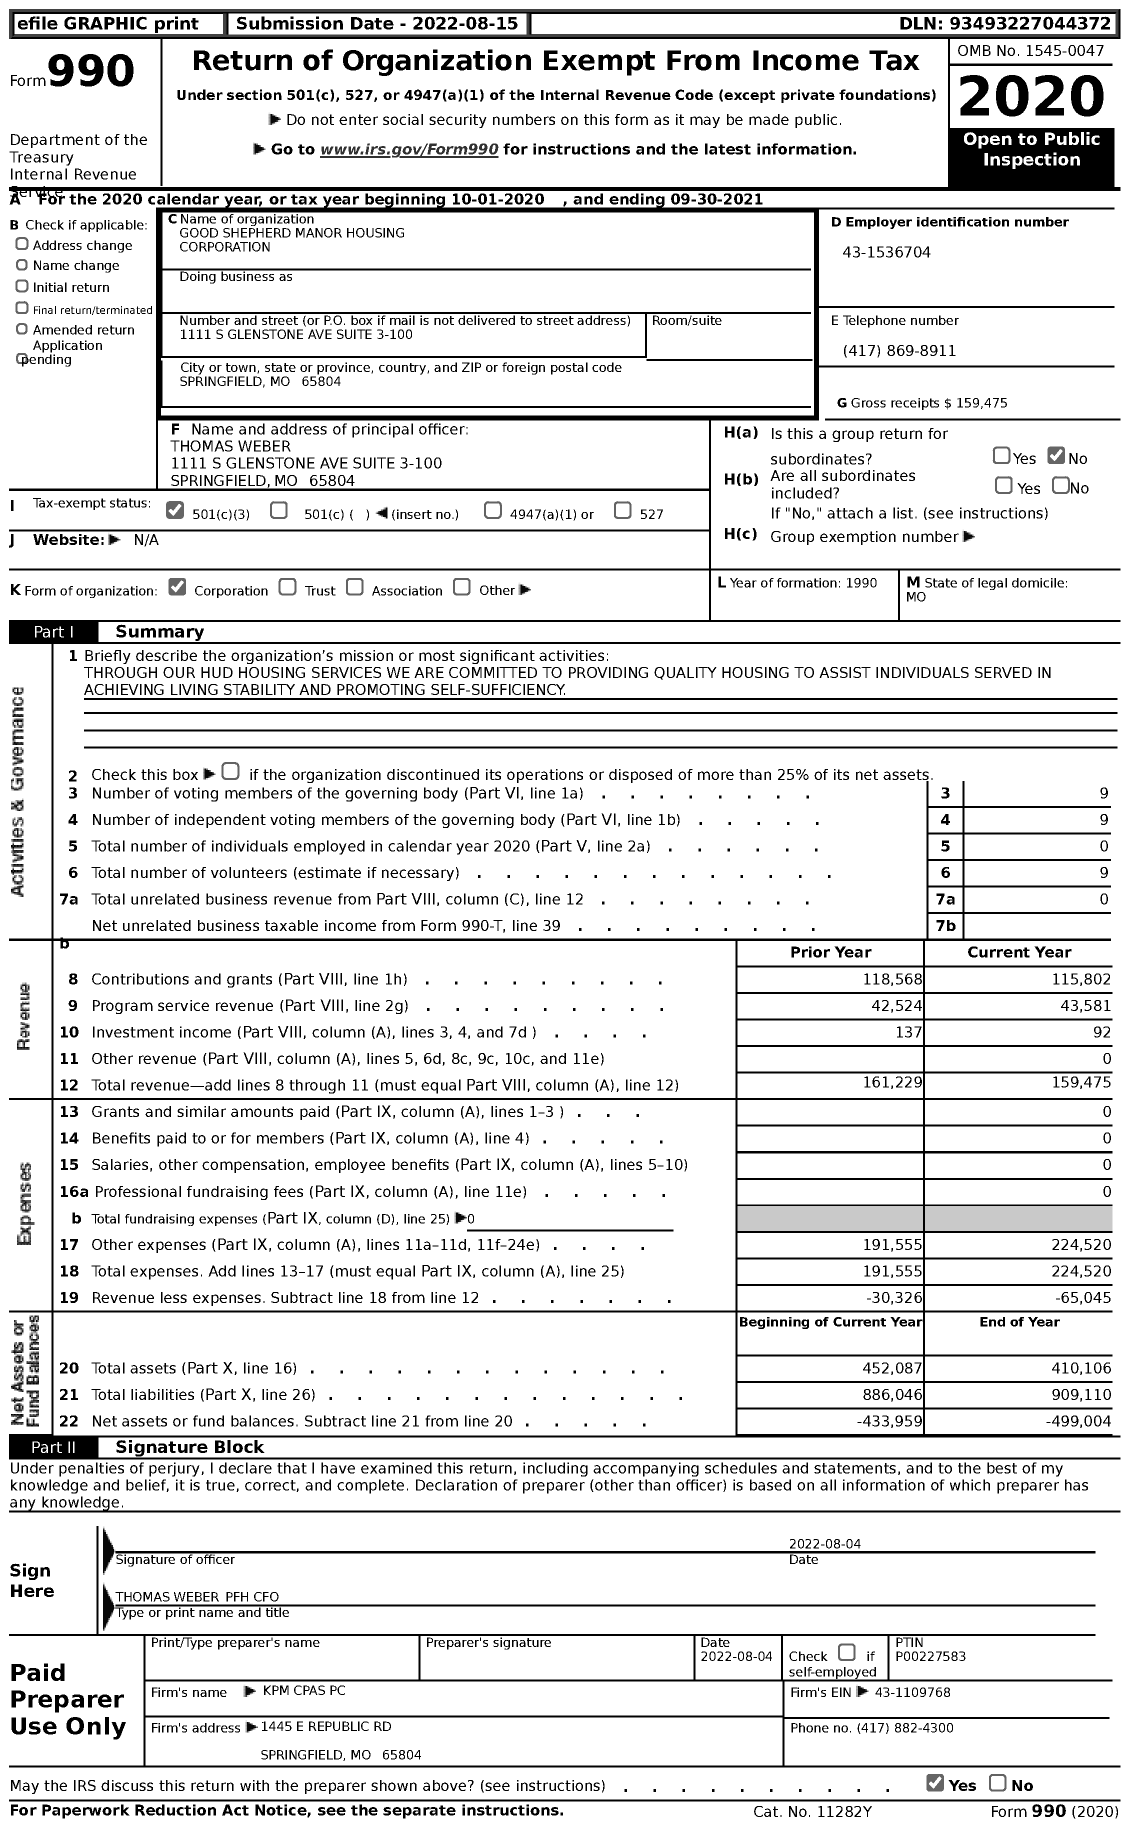 Image of first page of 2020 Form 990 for Good Shepherd Manor Housing Corporation